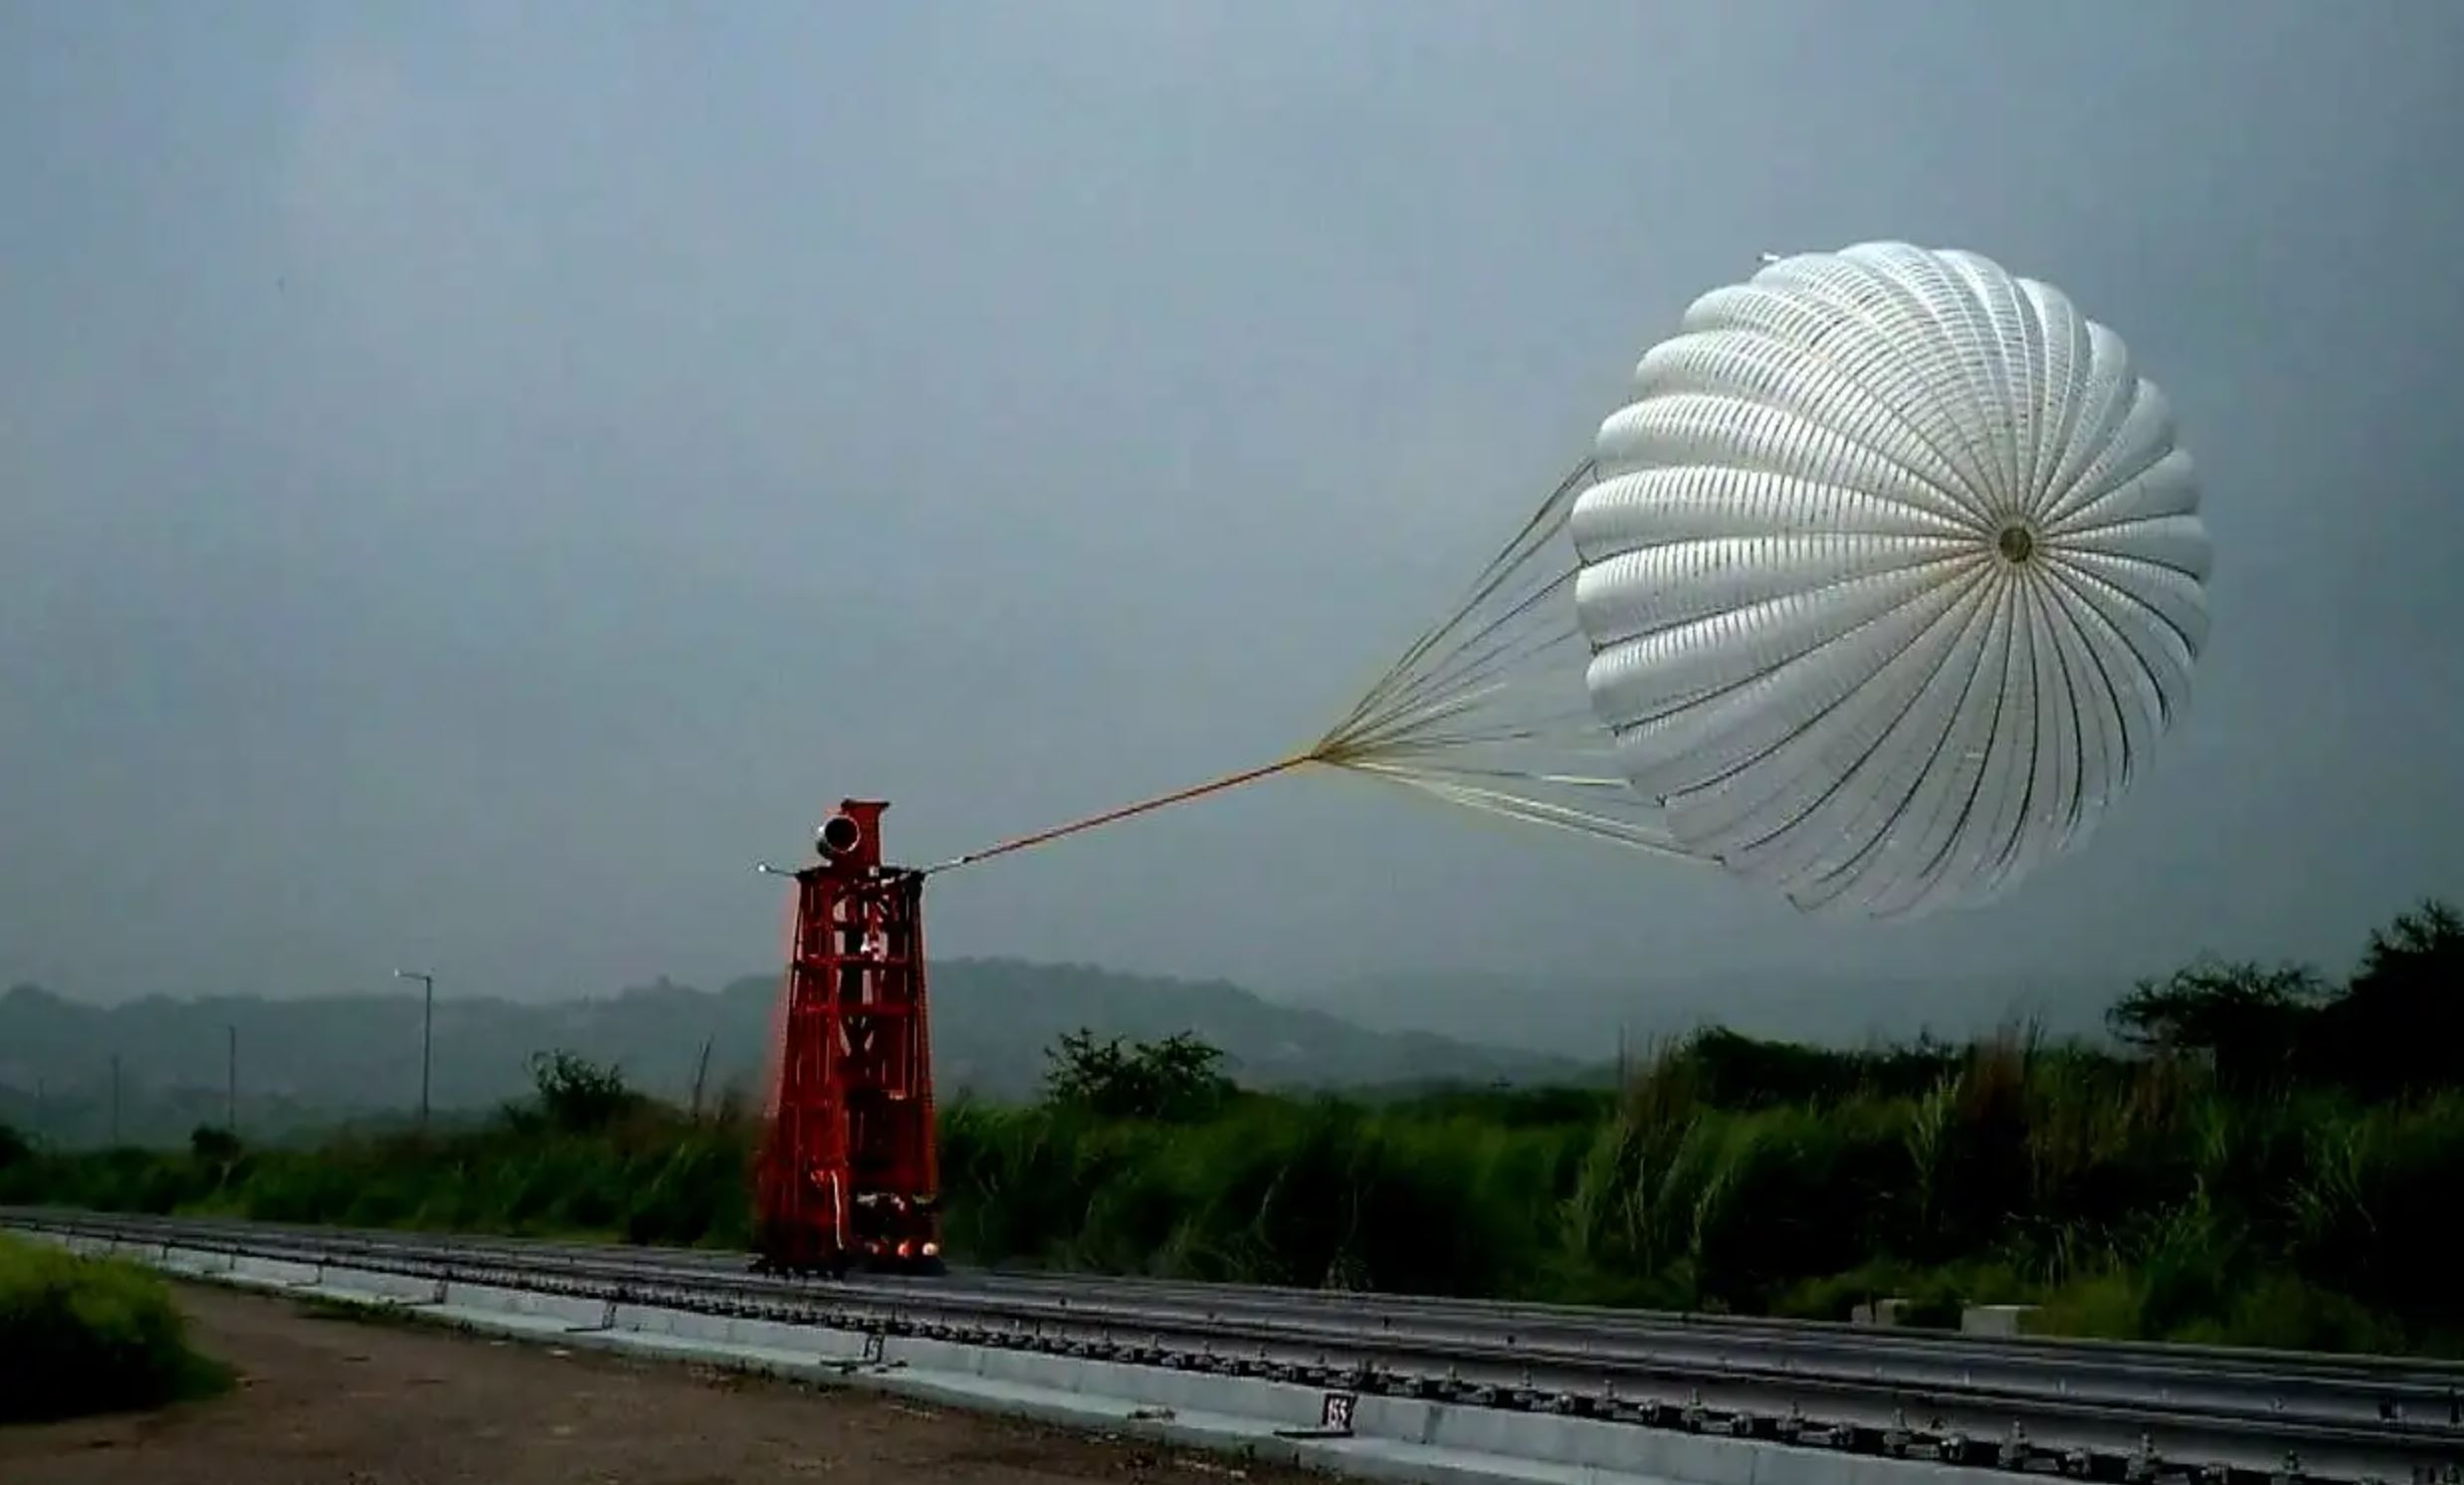 a metal stand is rocketed down train tracks as a parachute is pulled behind.